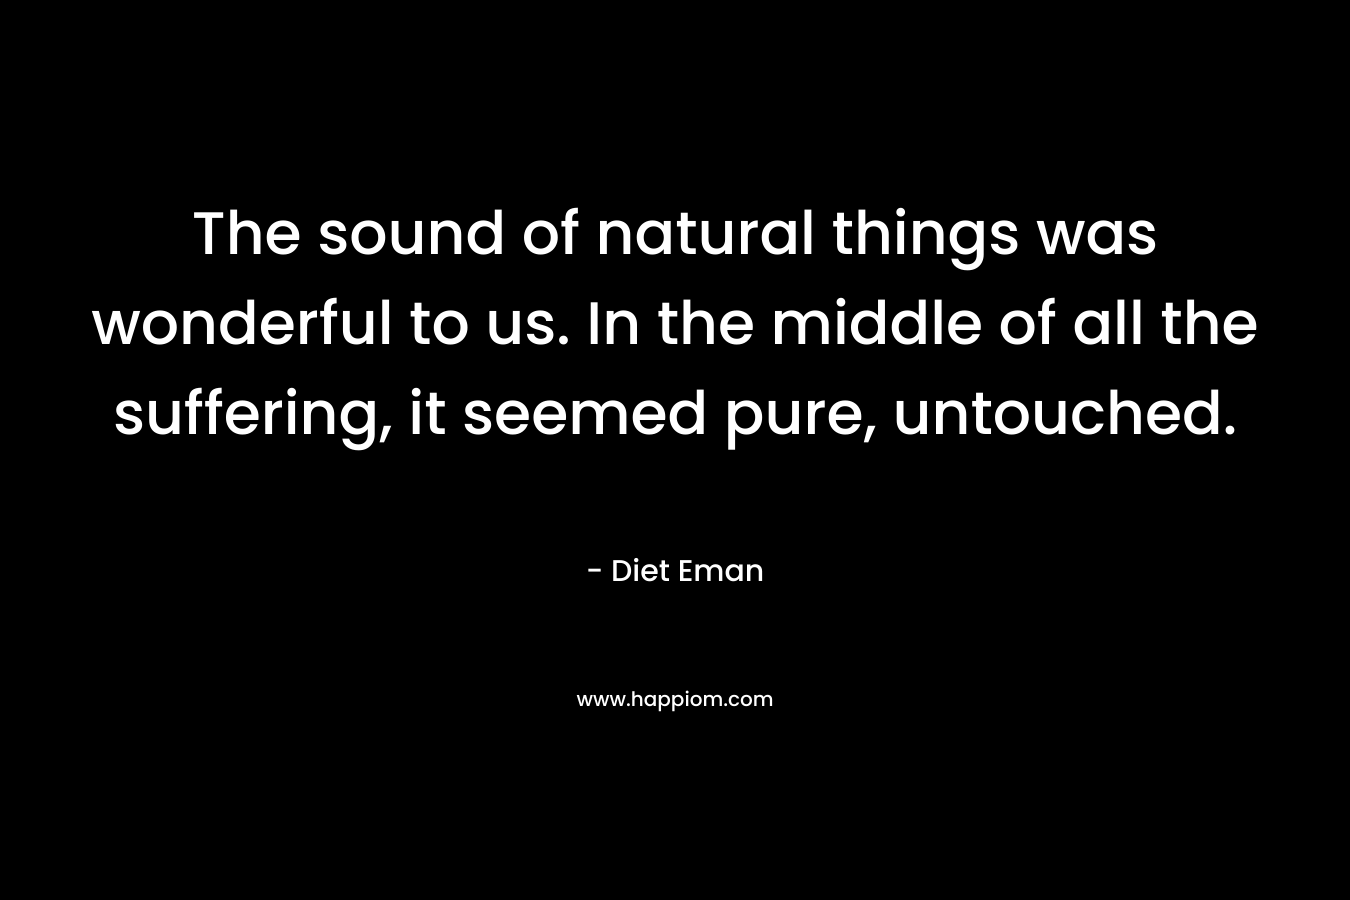 The sound of natural things was wonderful to us. In the middle of all the suffering, it seemed pure, untouched. – Diet Eman